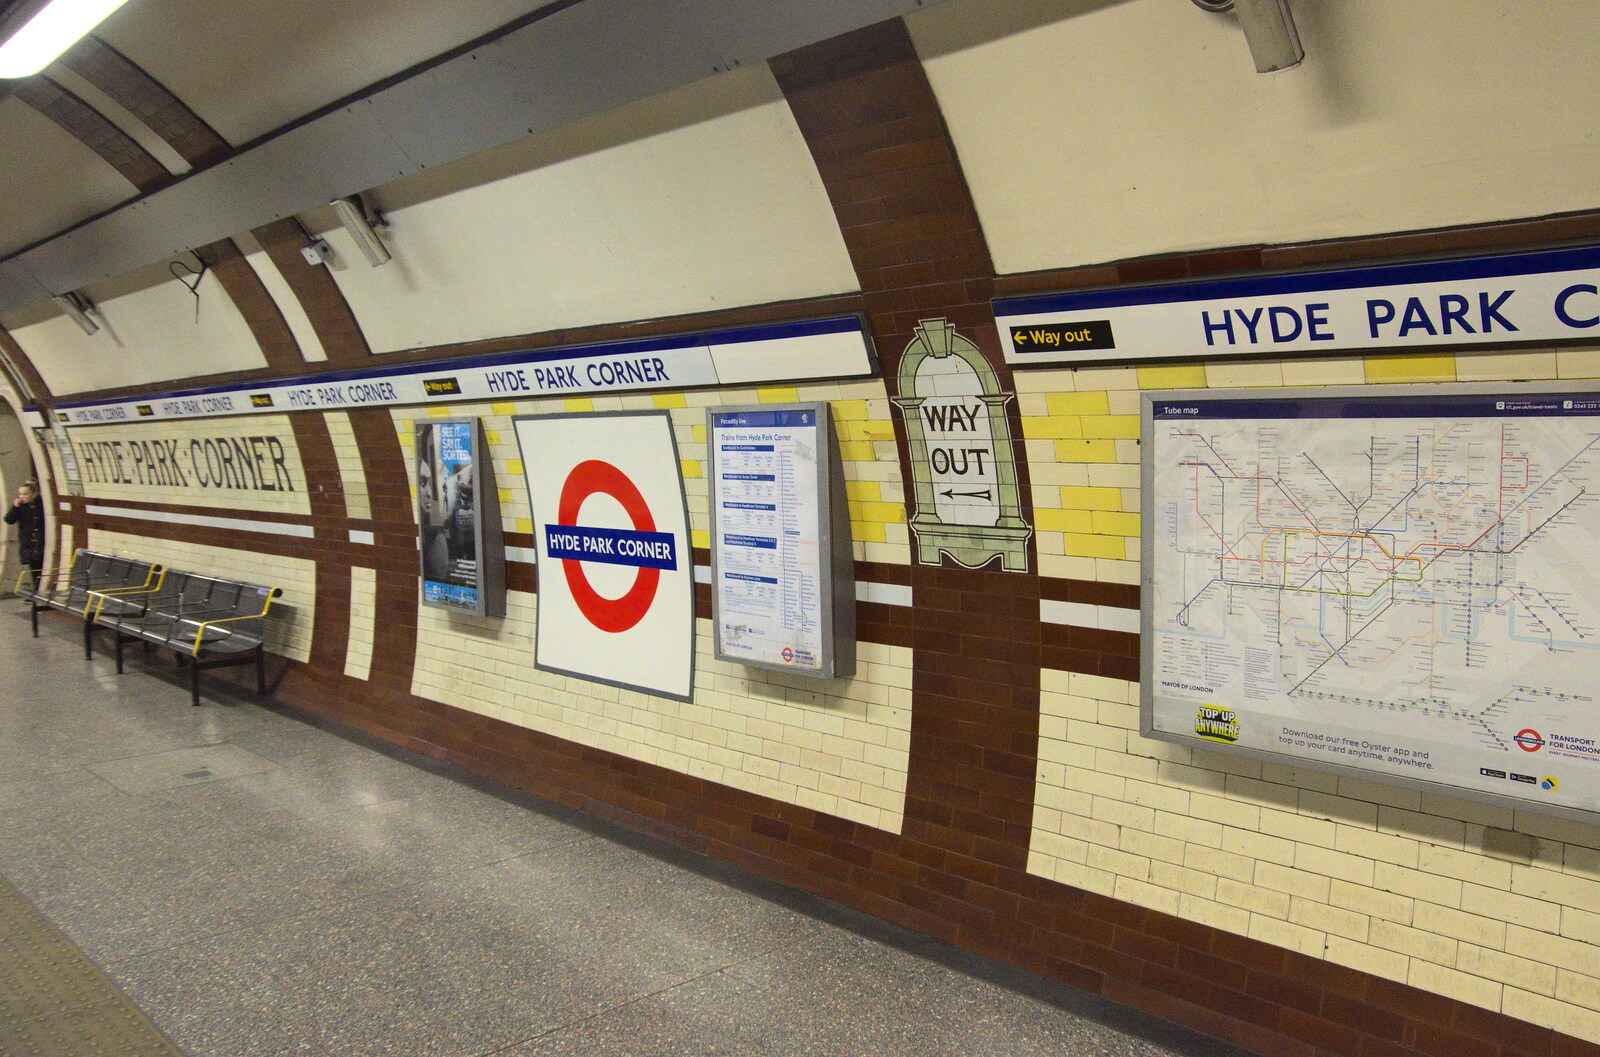 Hyde Park Corner's original tiling from A Trip to the Natural History Museum, Kensington, London - 15th January 2022